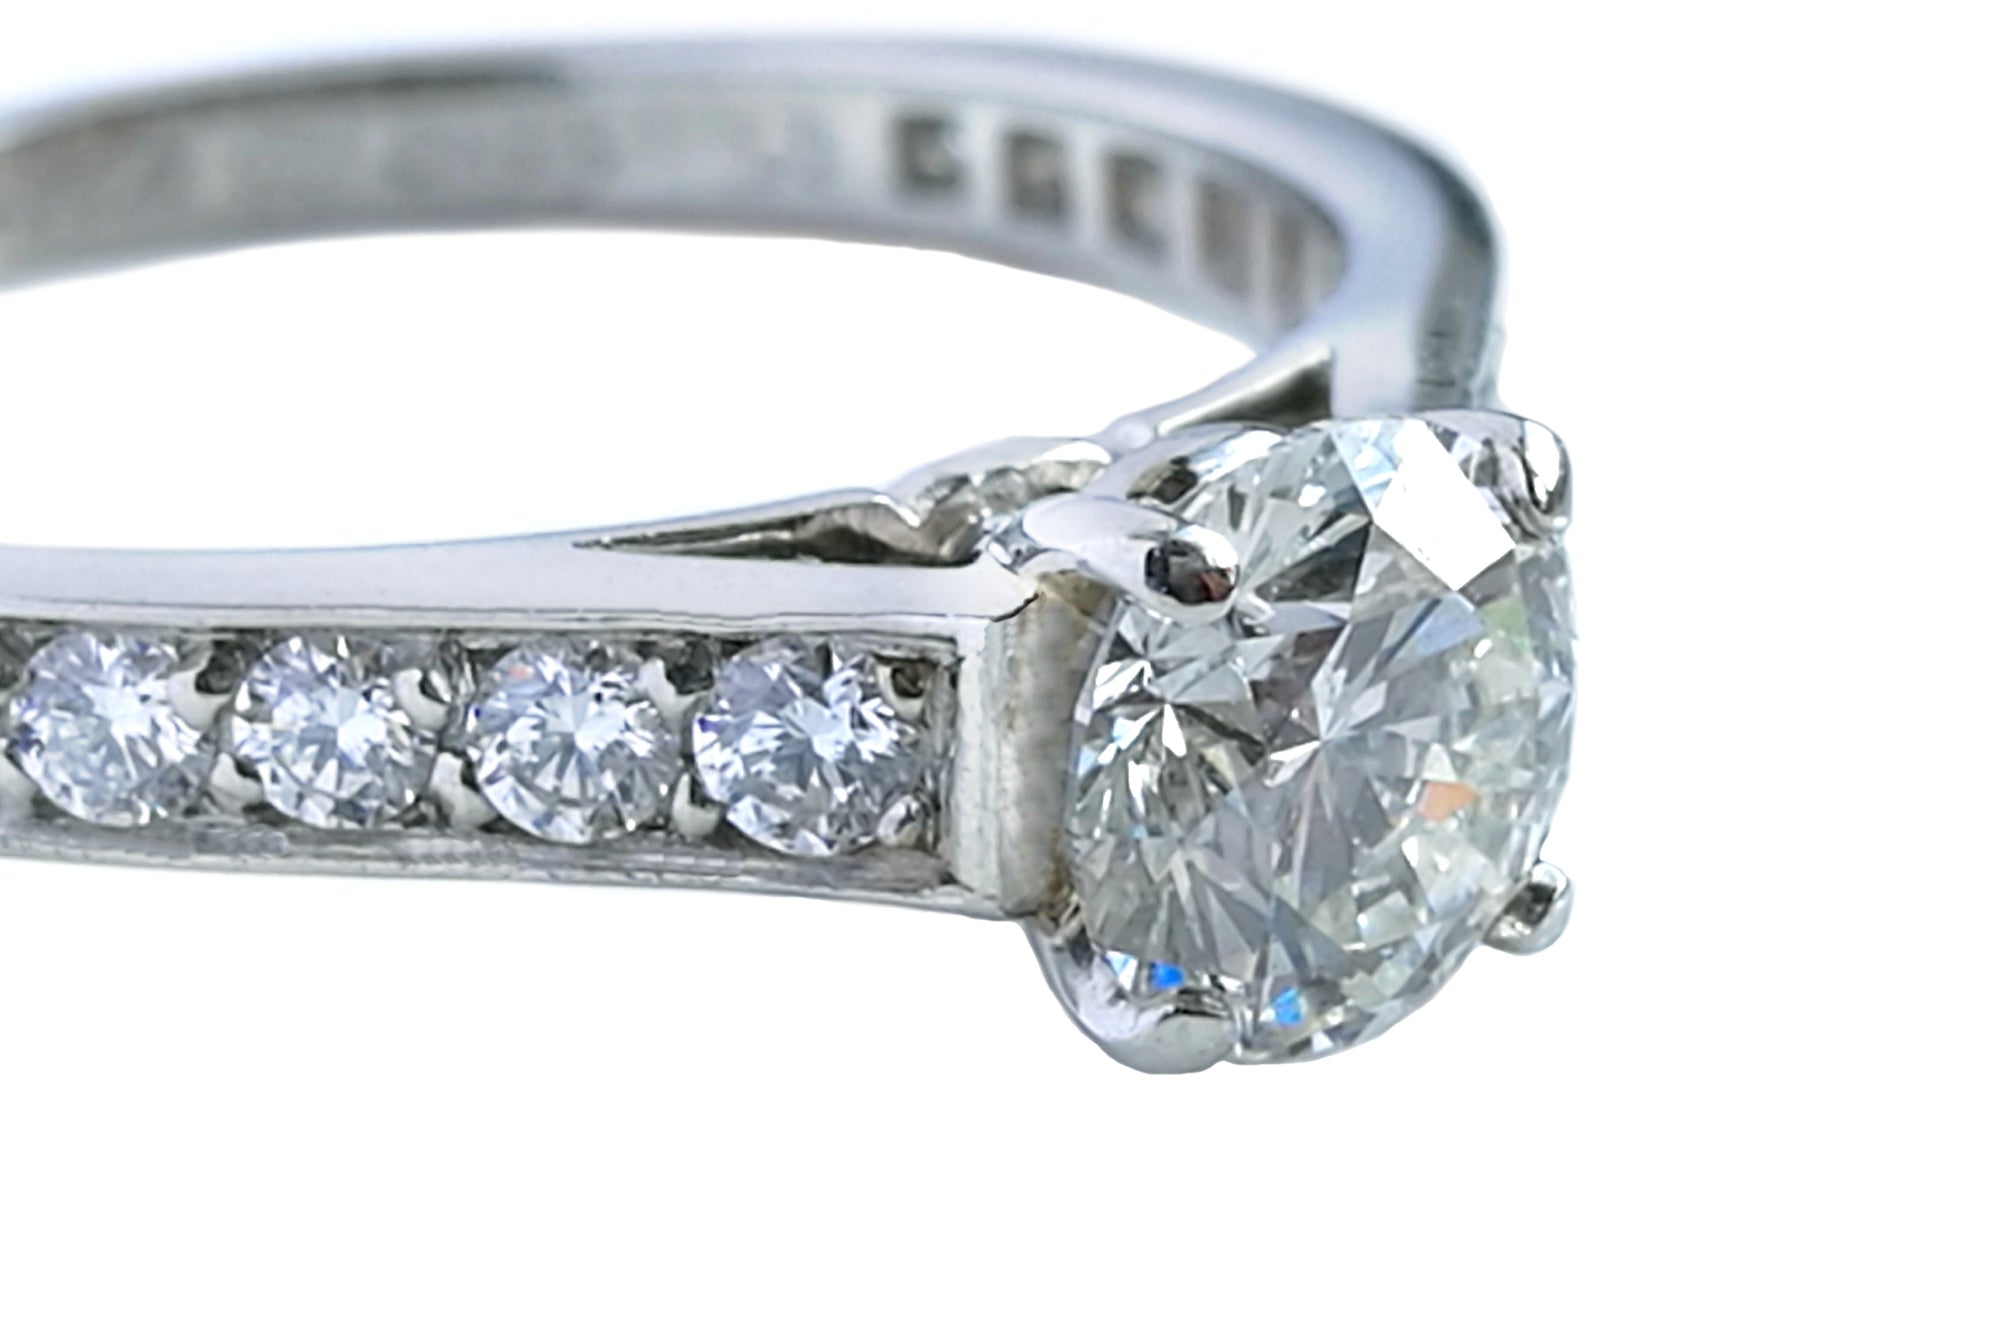 Cartier 1895 0.55ct H/VS1 Diamond Engagement Ring with Paved Platinum Band